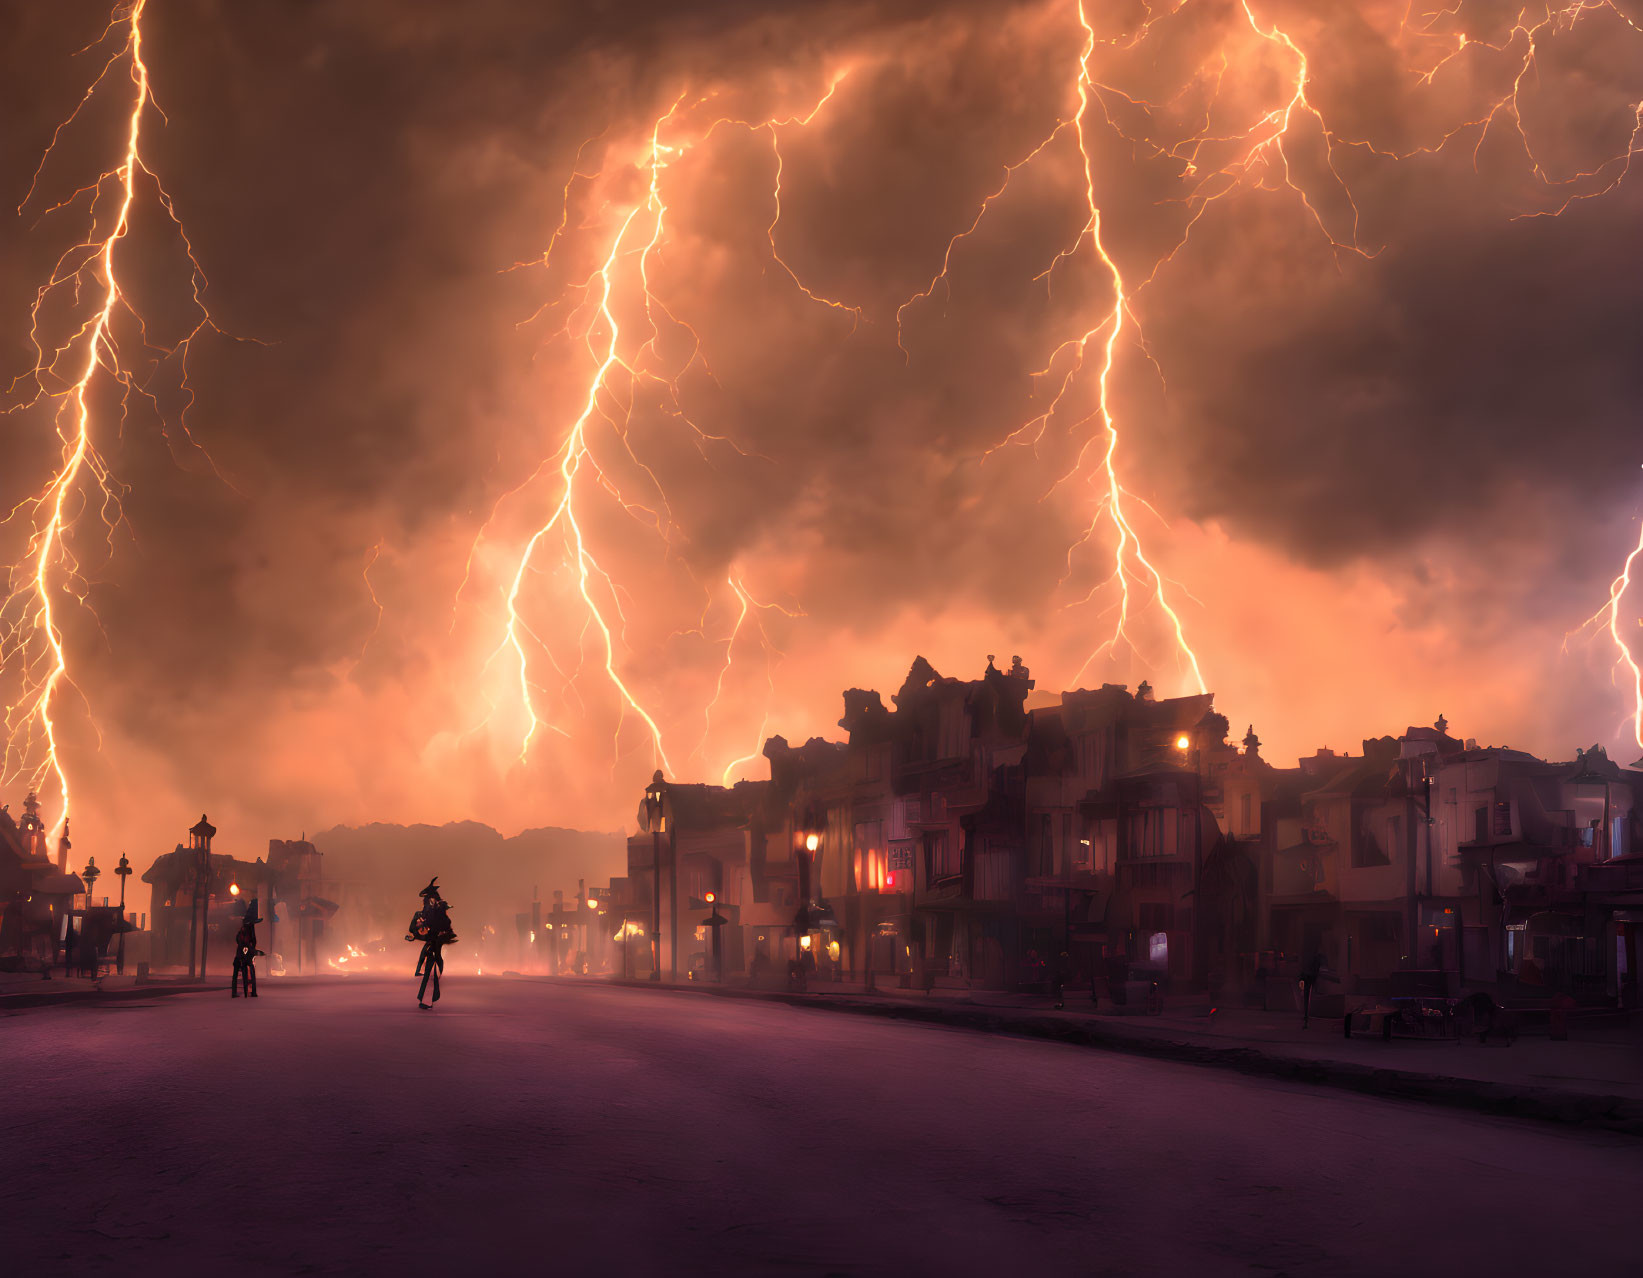 Silhouetted figure on deserted street under stormy sky with lightning strikes